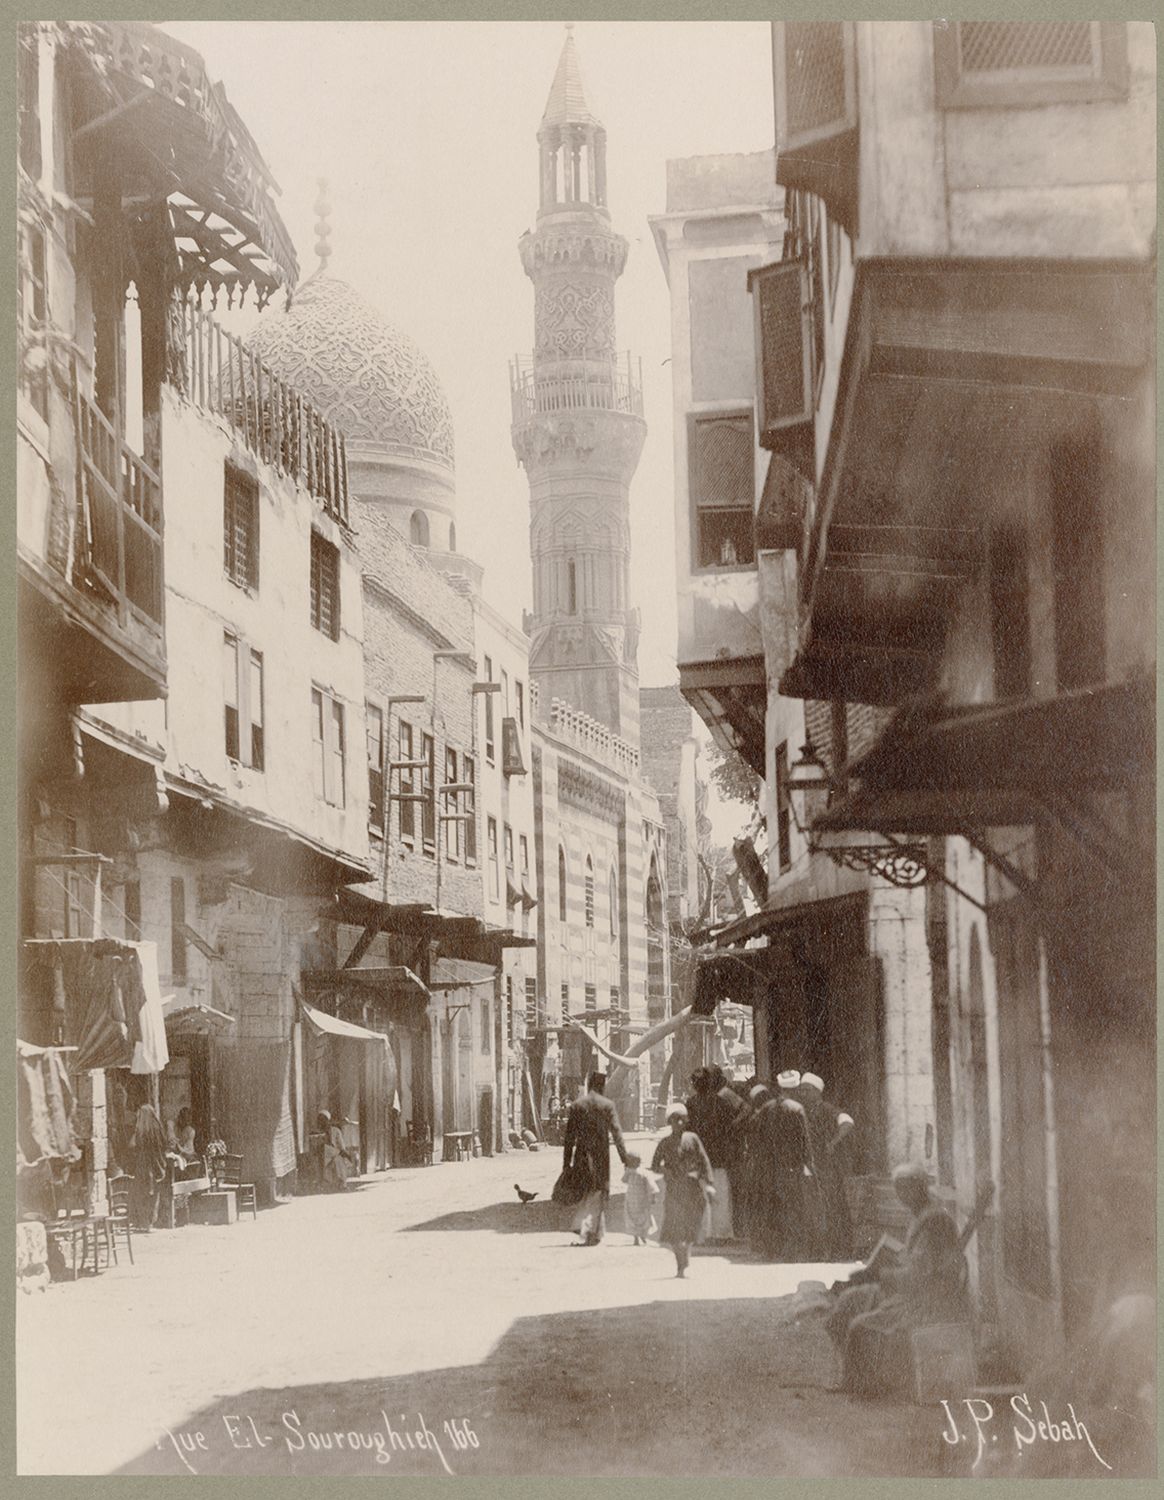 View along Surujiyya Street in Cairo, Egypt. The Funerary Complex of Amir Ghanim al-Bahlawan is visible in background.